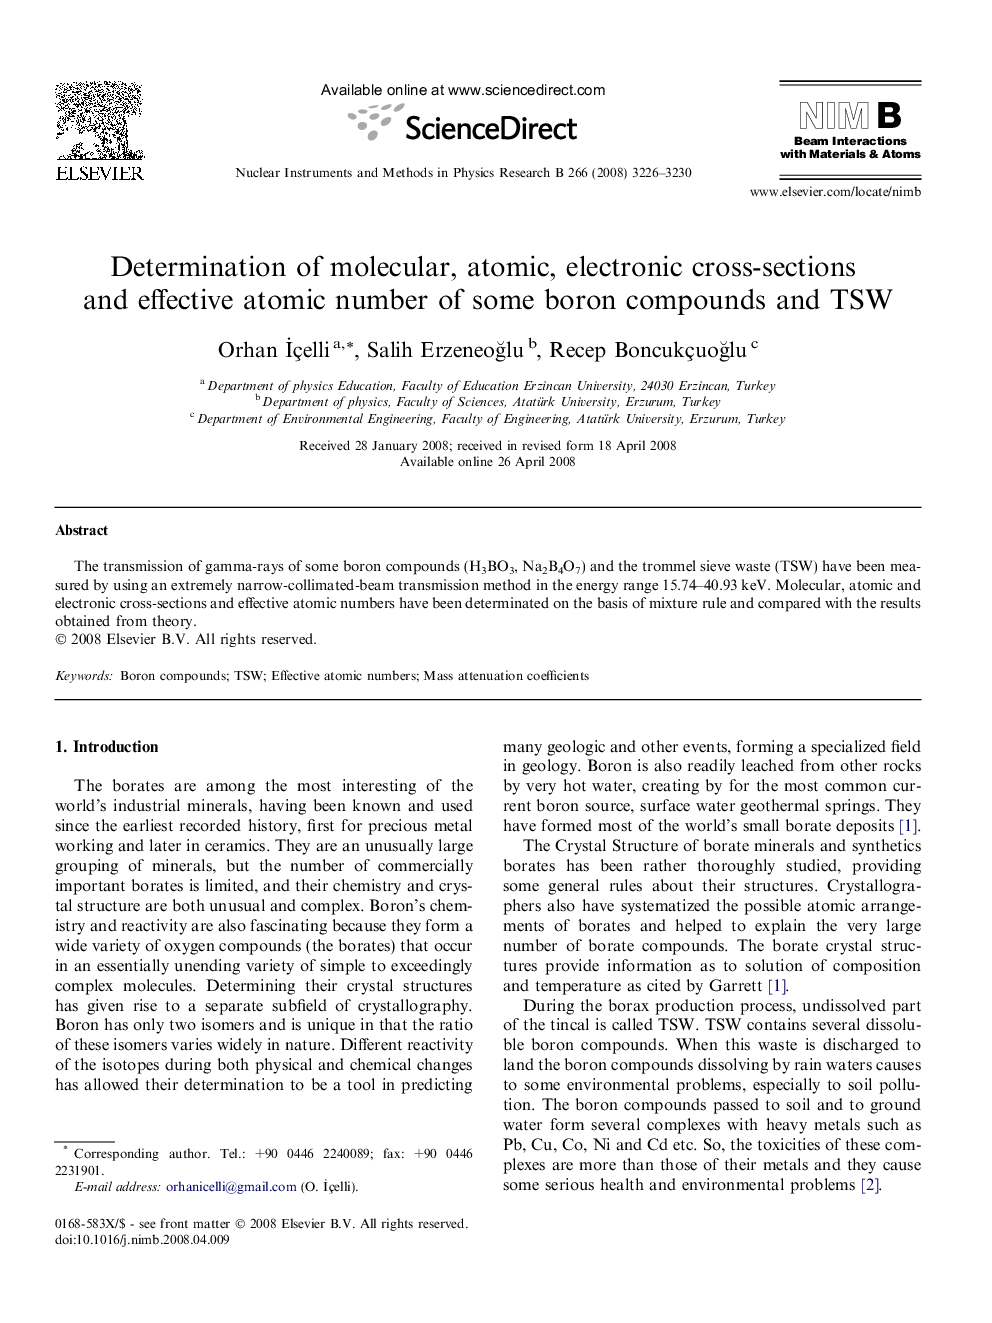 Determination of molecular, atomic, electronic cross-sections and effective atomic number of some boron compounds and TSW